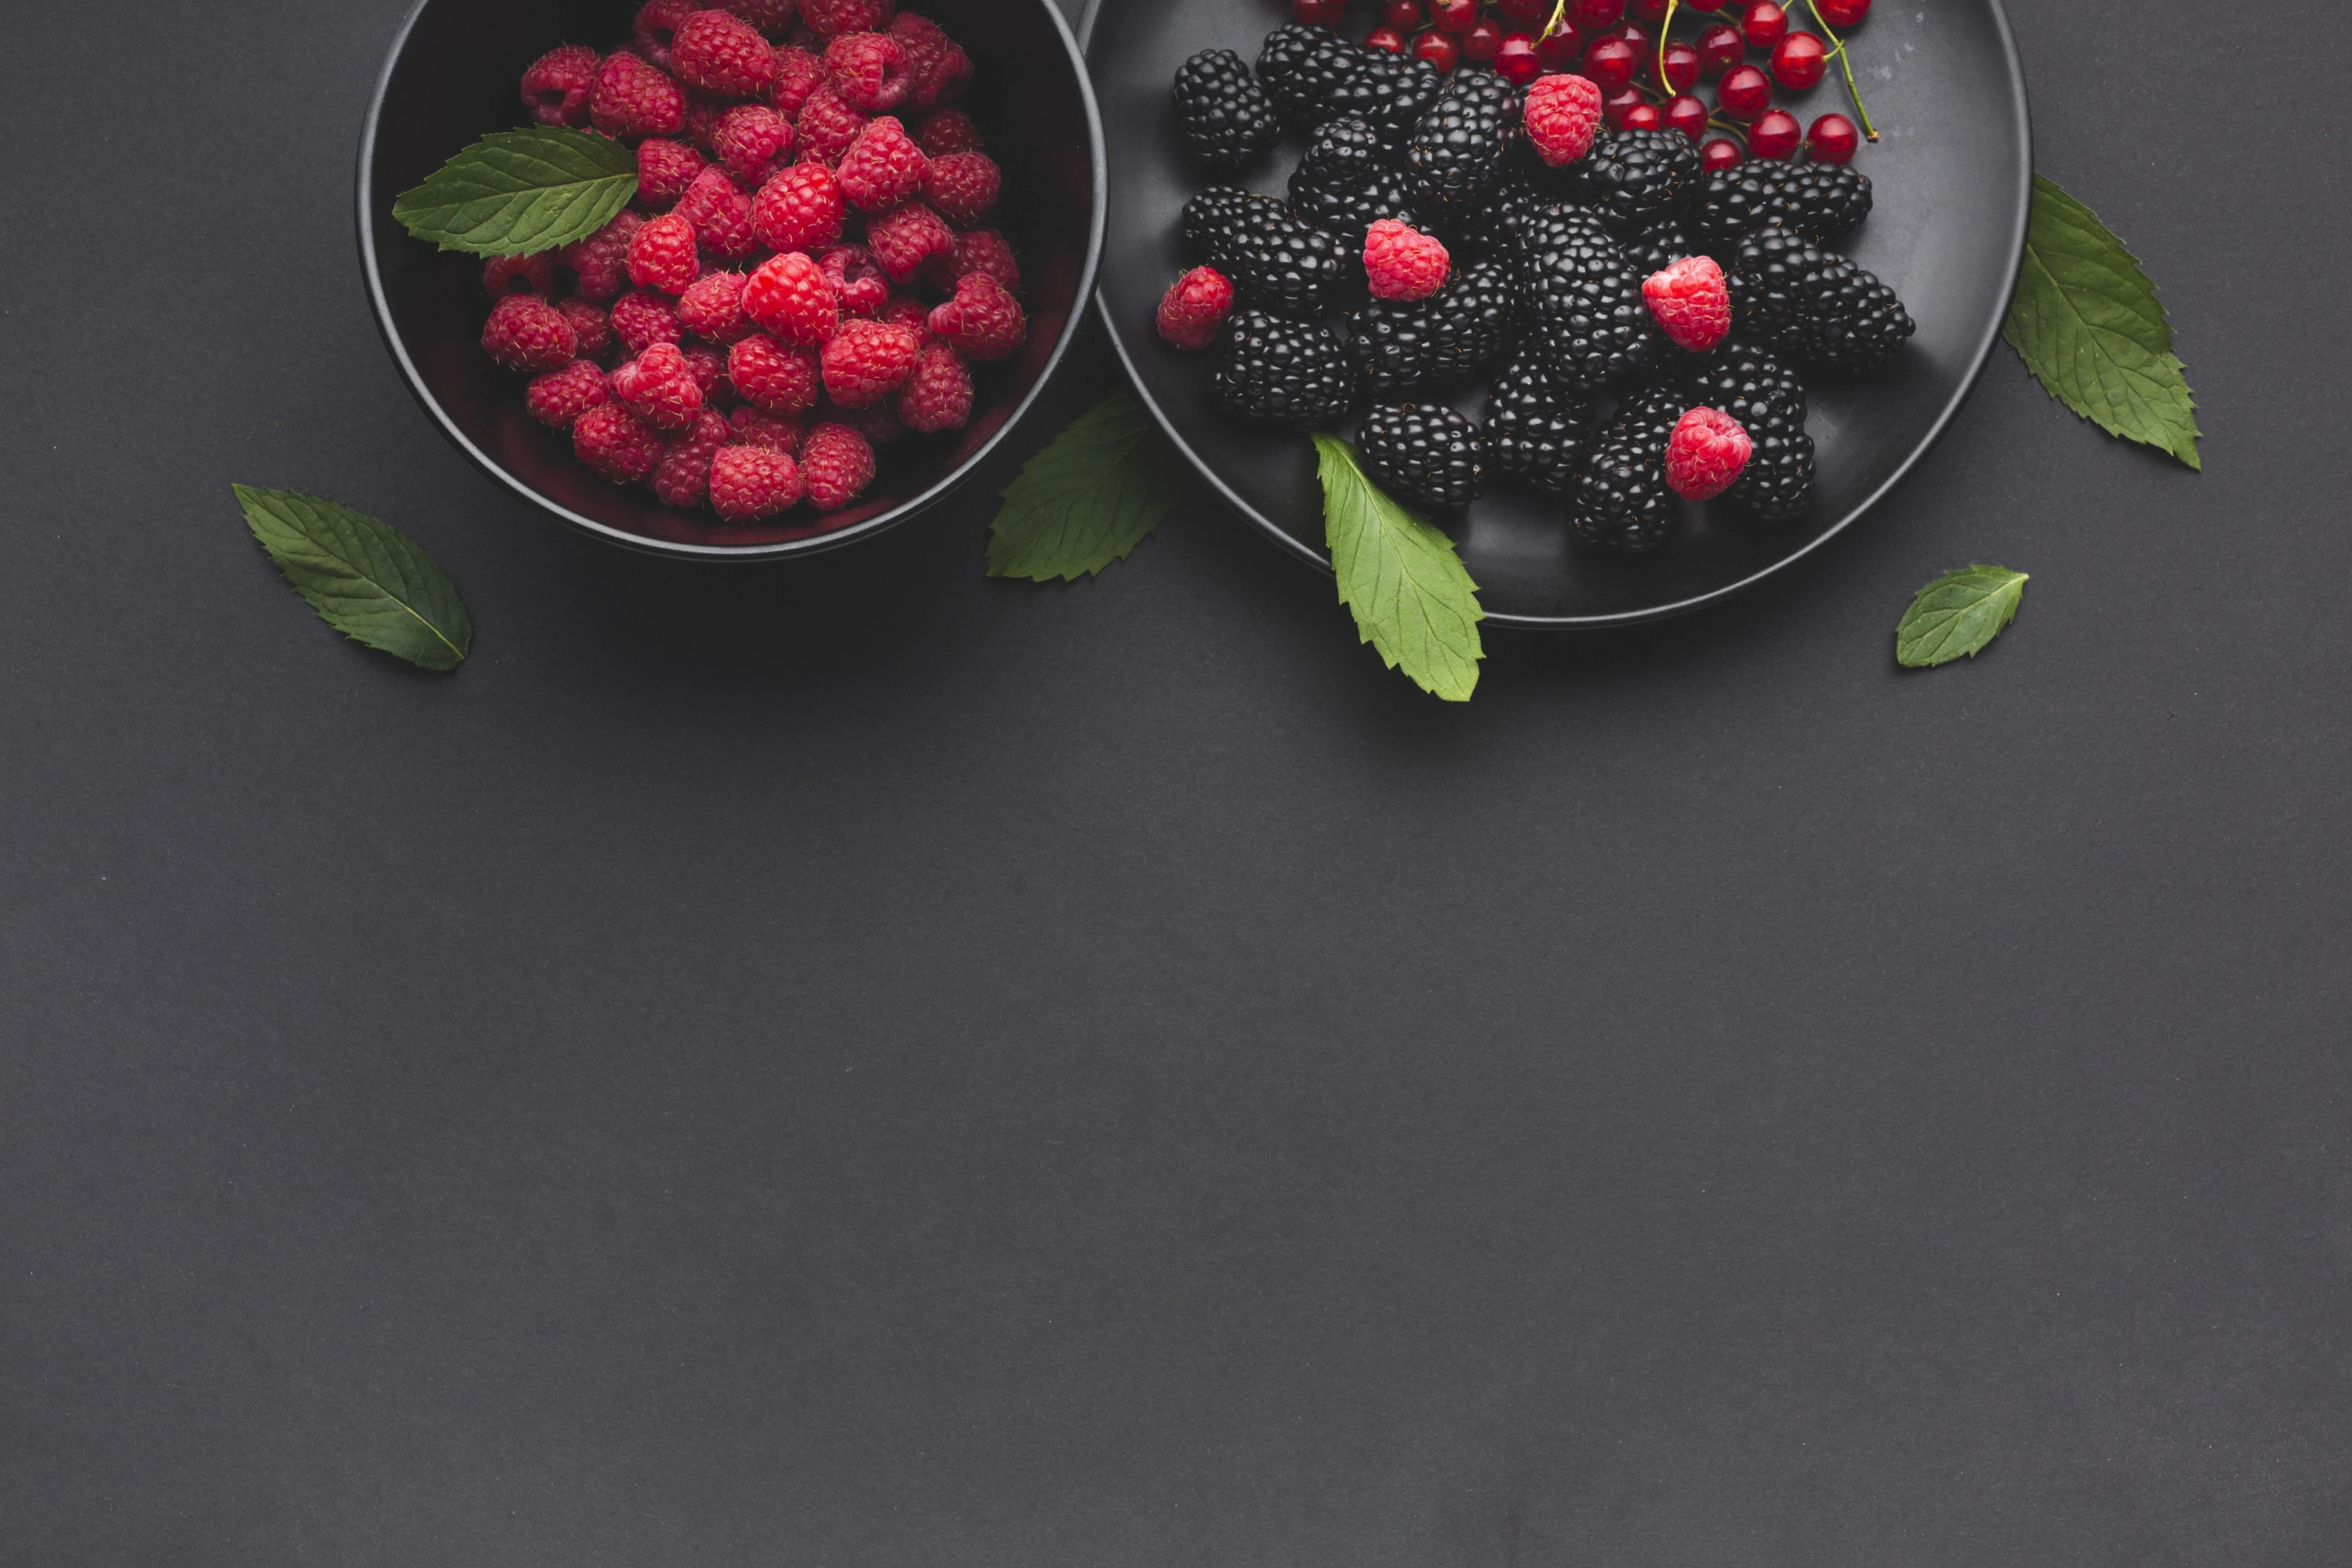 Plate and Bowl of Fresh Berries on Dark Table